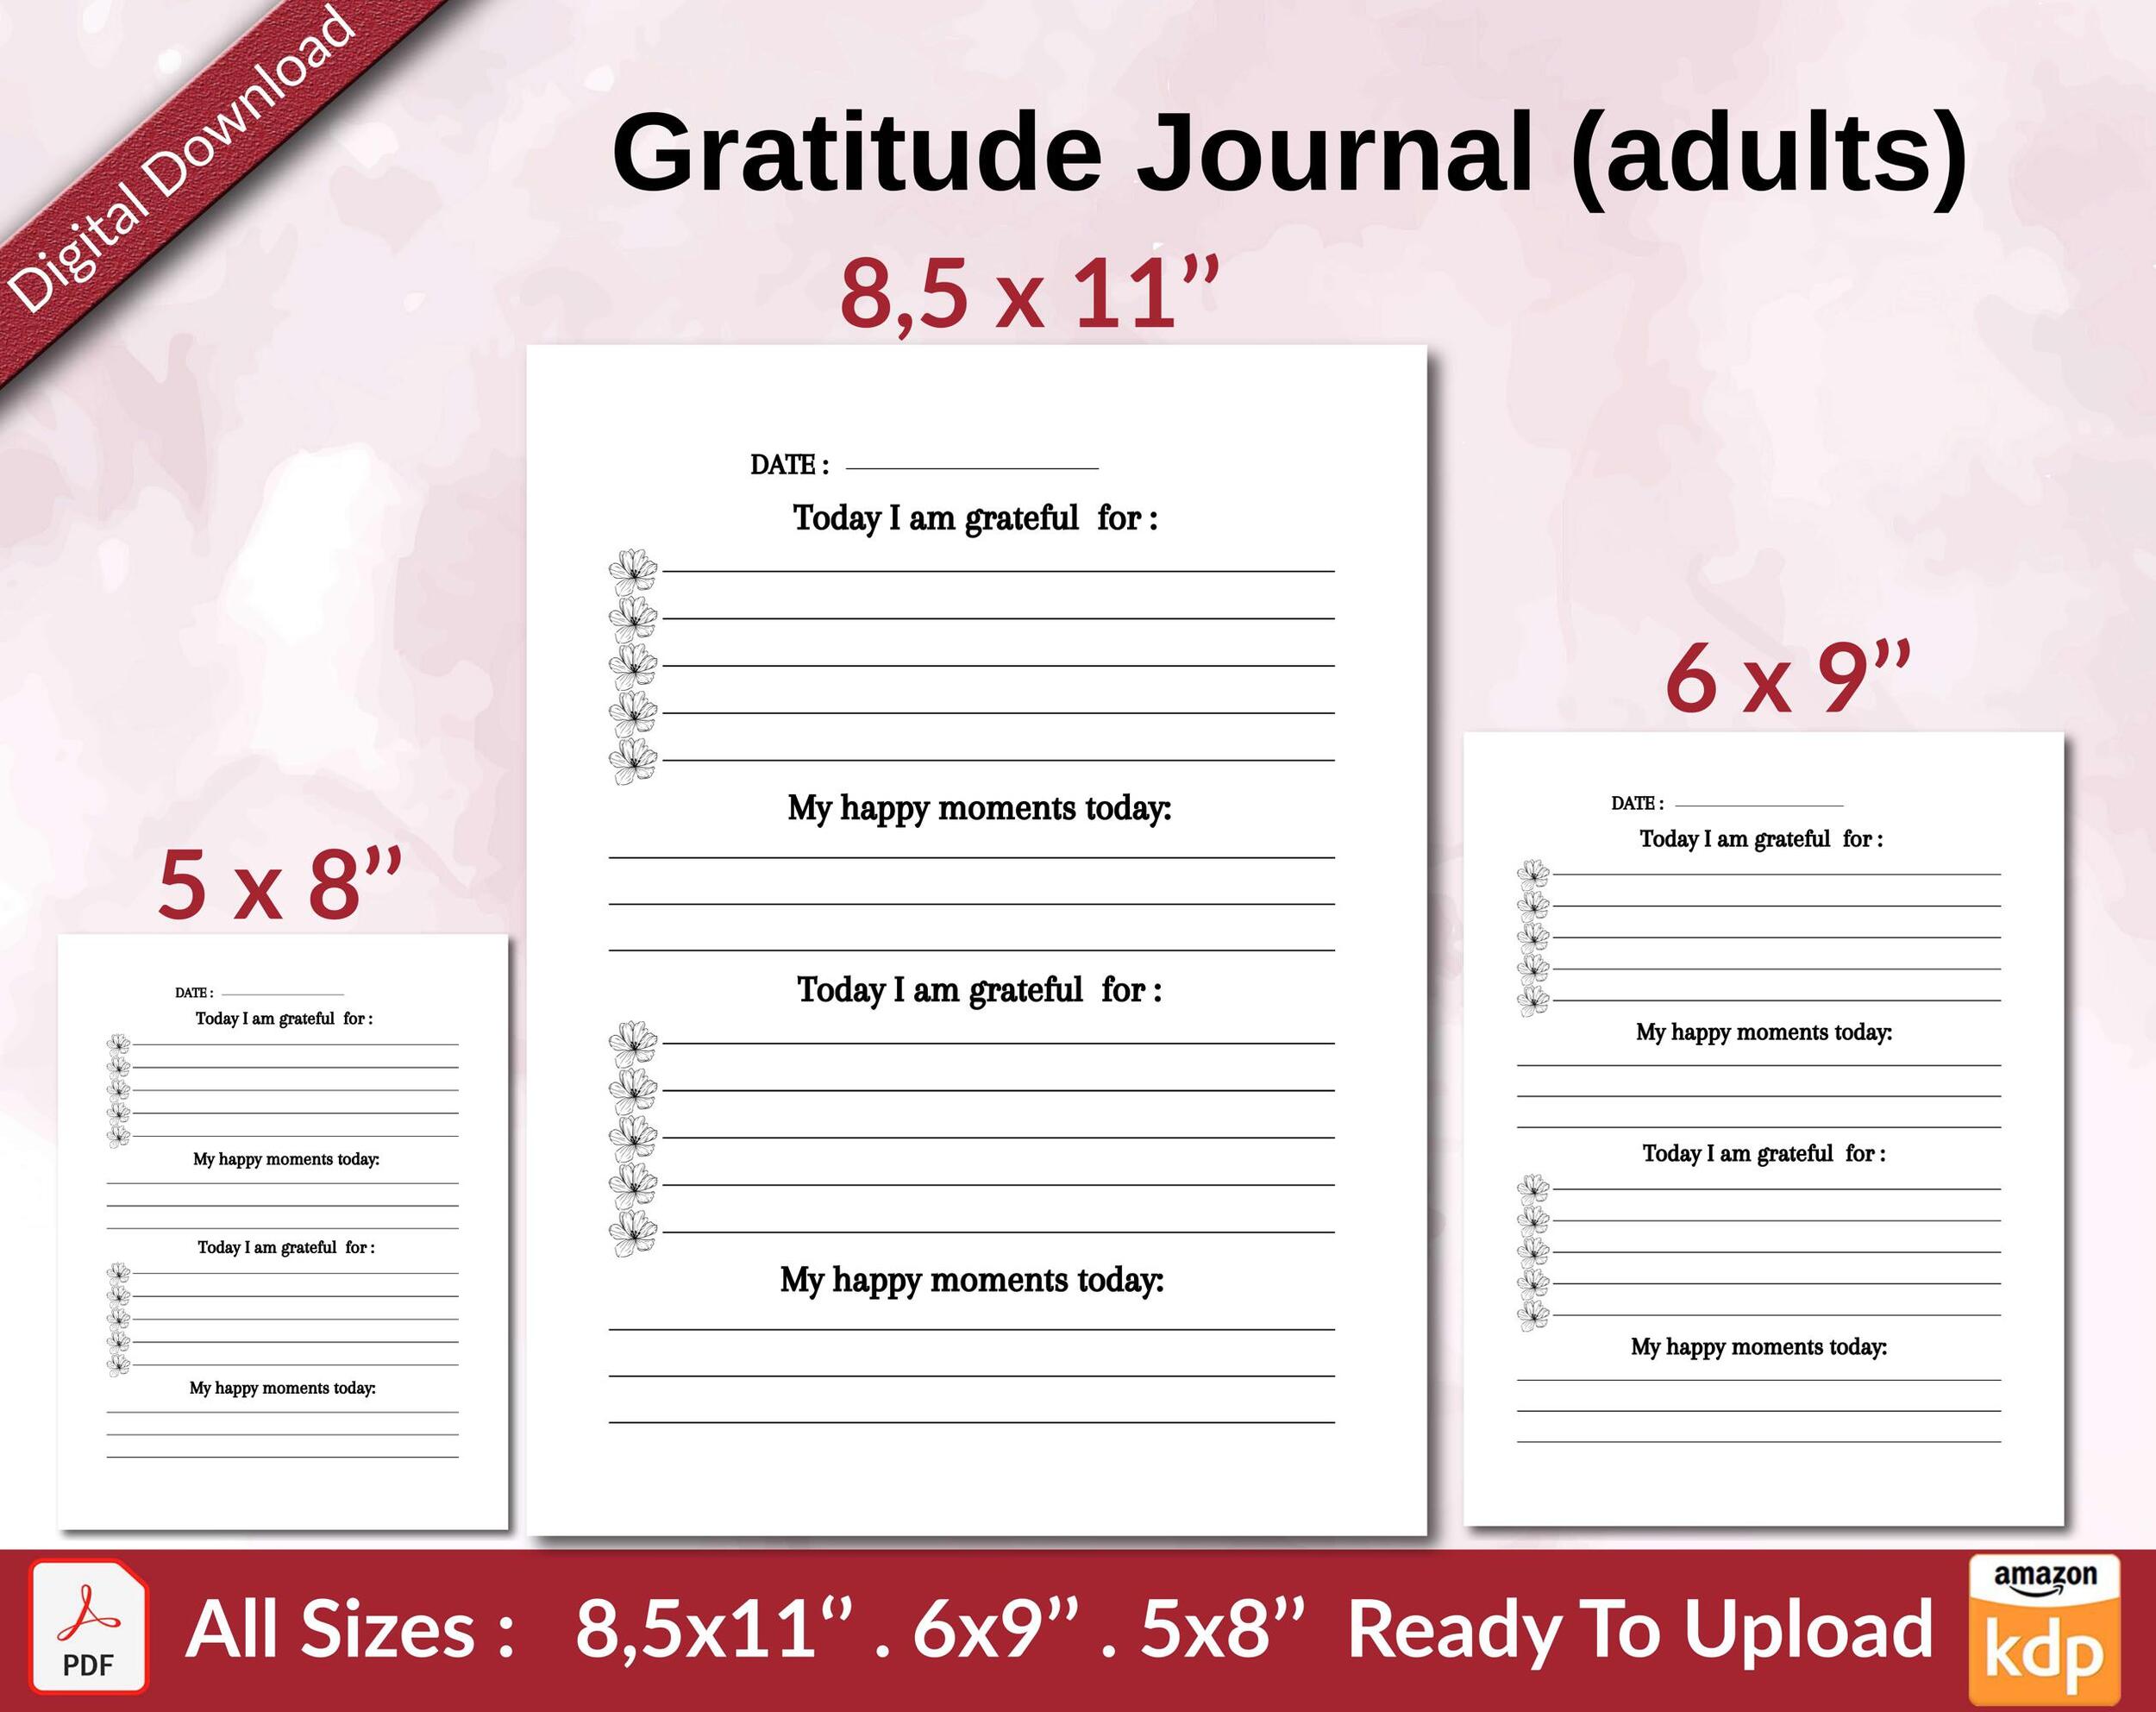 Gratitude Journal for Women KDP Interior Graphic by HITUBRAND